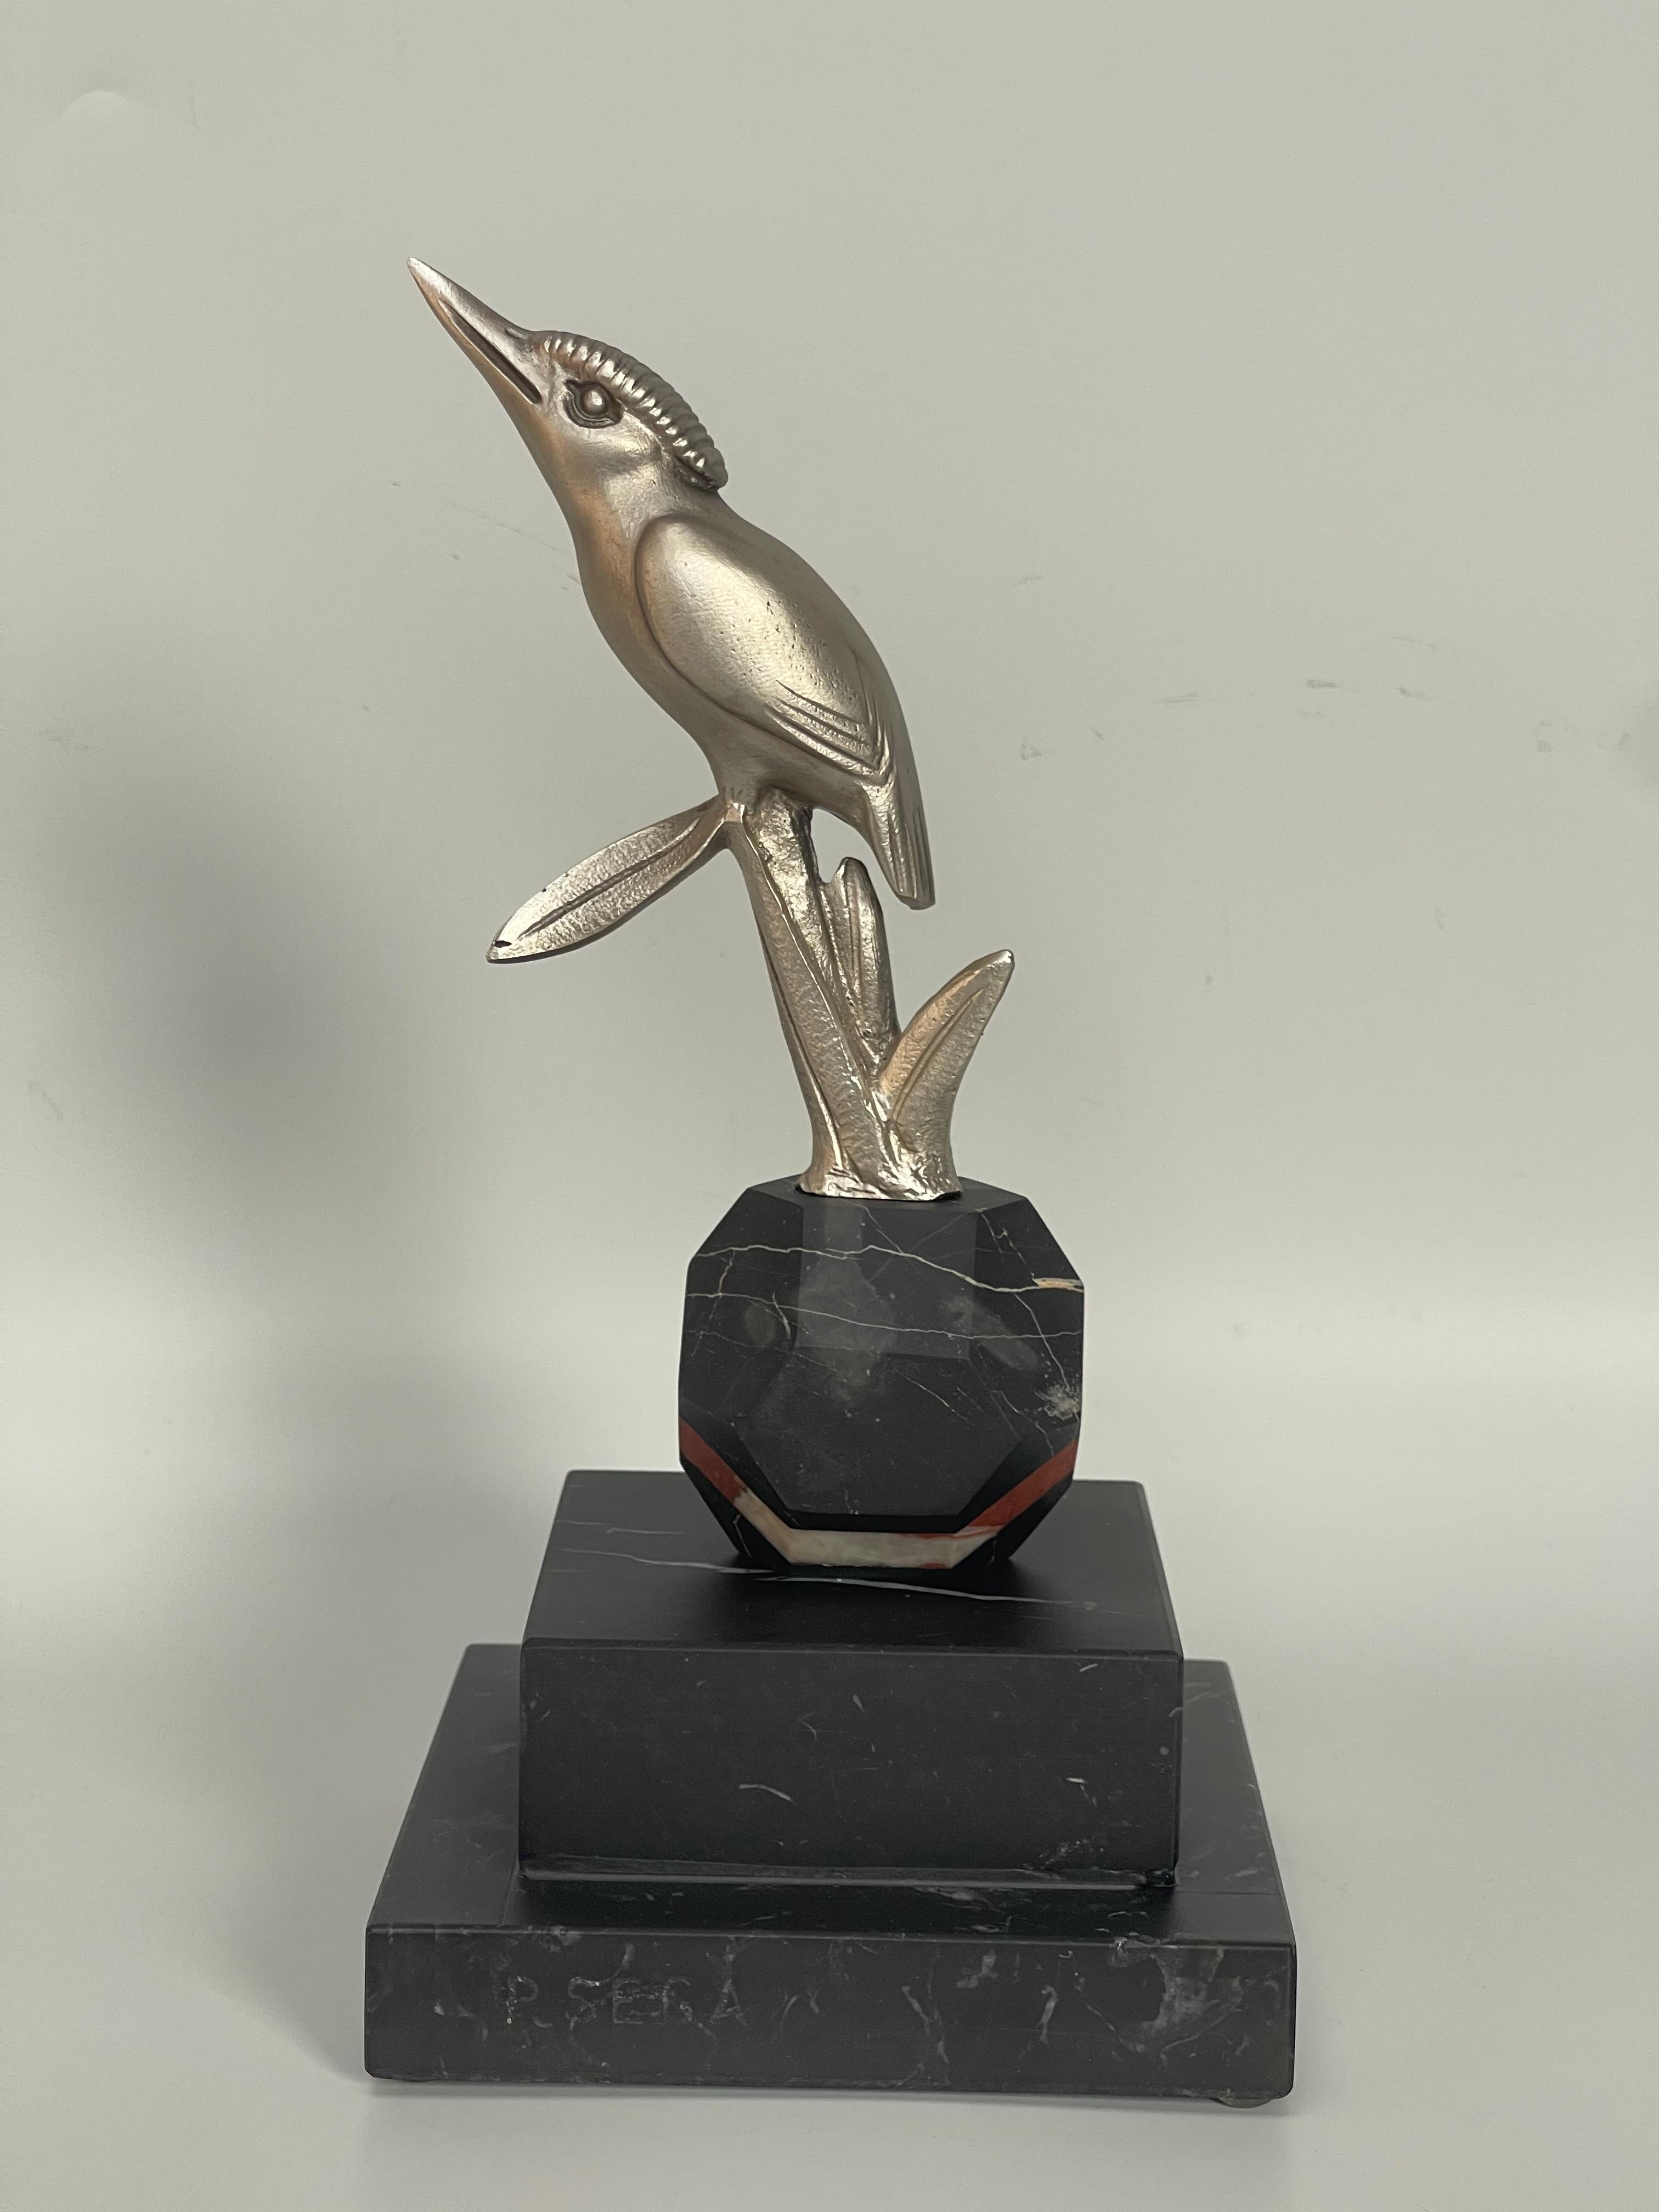 Art deco paperweight circa 1930.
Kingfisher in silvered bronze on a black marble base veined with white.
Signature on the base P. Sega for Pierre Sega.
In perfect condition.

Height: 21.5cm
Width: 11cm
Depth: 11cm
Weight: 1.7 kg

PIERRE SEGA: late